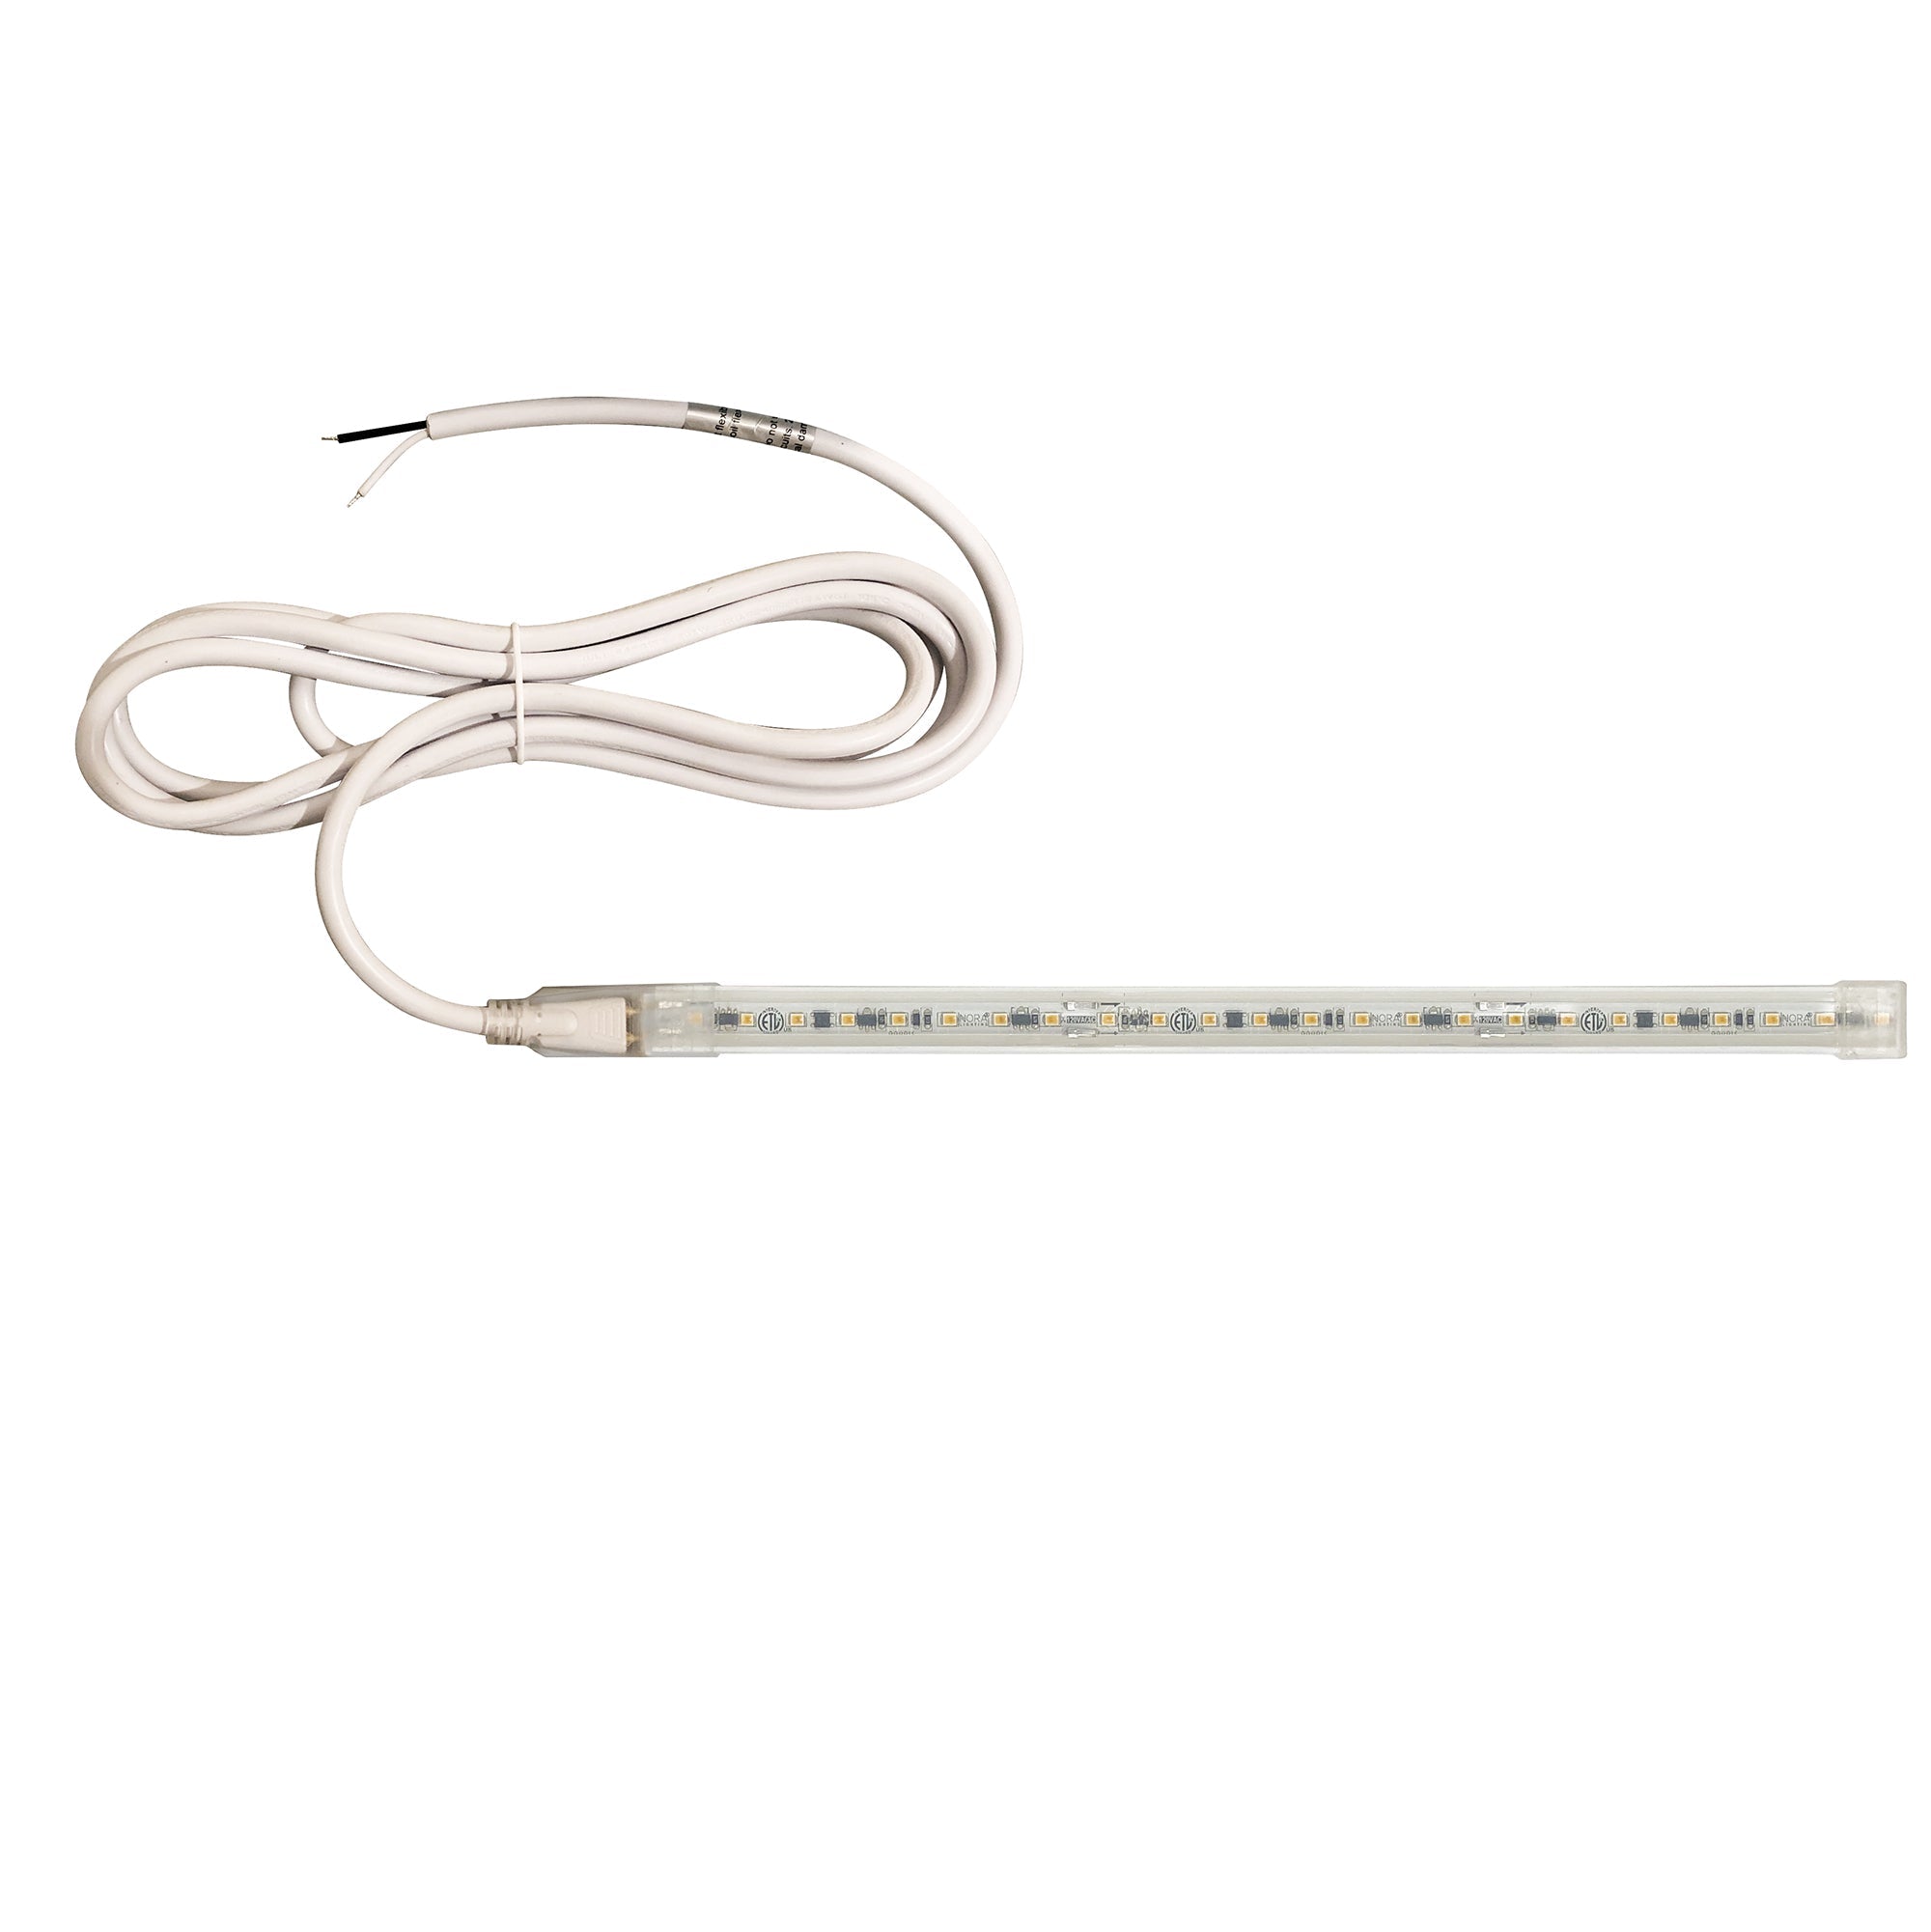 Nora Lighting NUTP13-W113-12-930/HW - Accent / Undercabinet - Custom Cut 113-ft 120V Continuous LED Tape Light, 330lm / 3.6W per foot, 3000K, w/ Mounting Clips and 8' Hardwired Power Cord